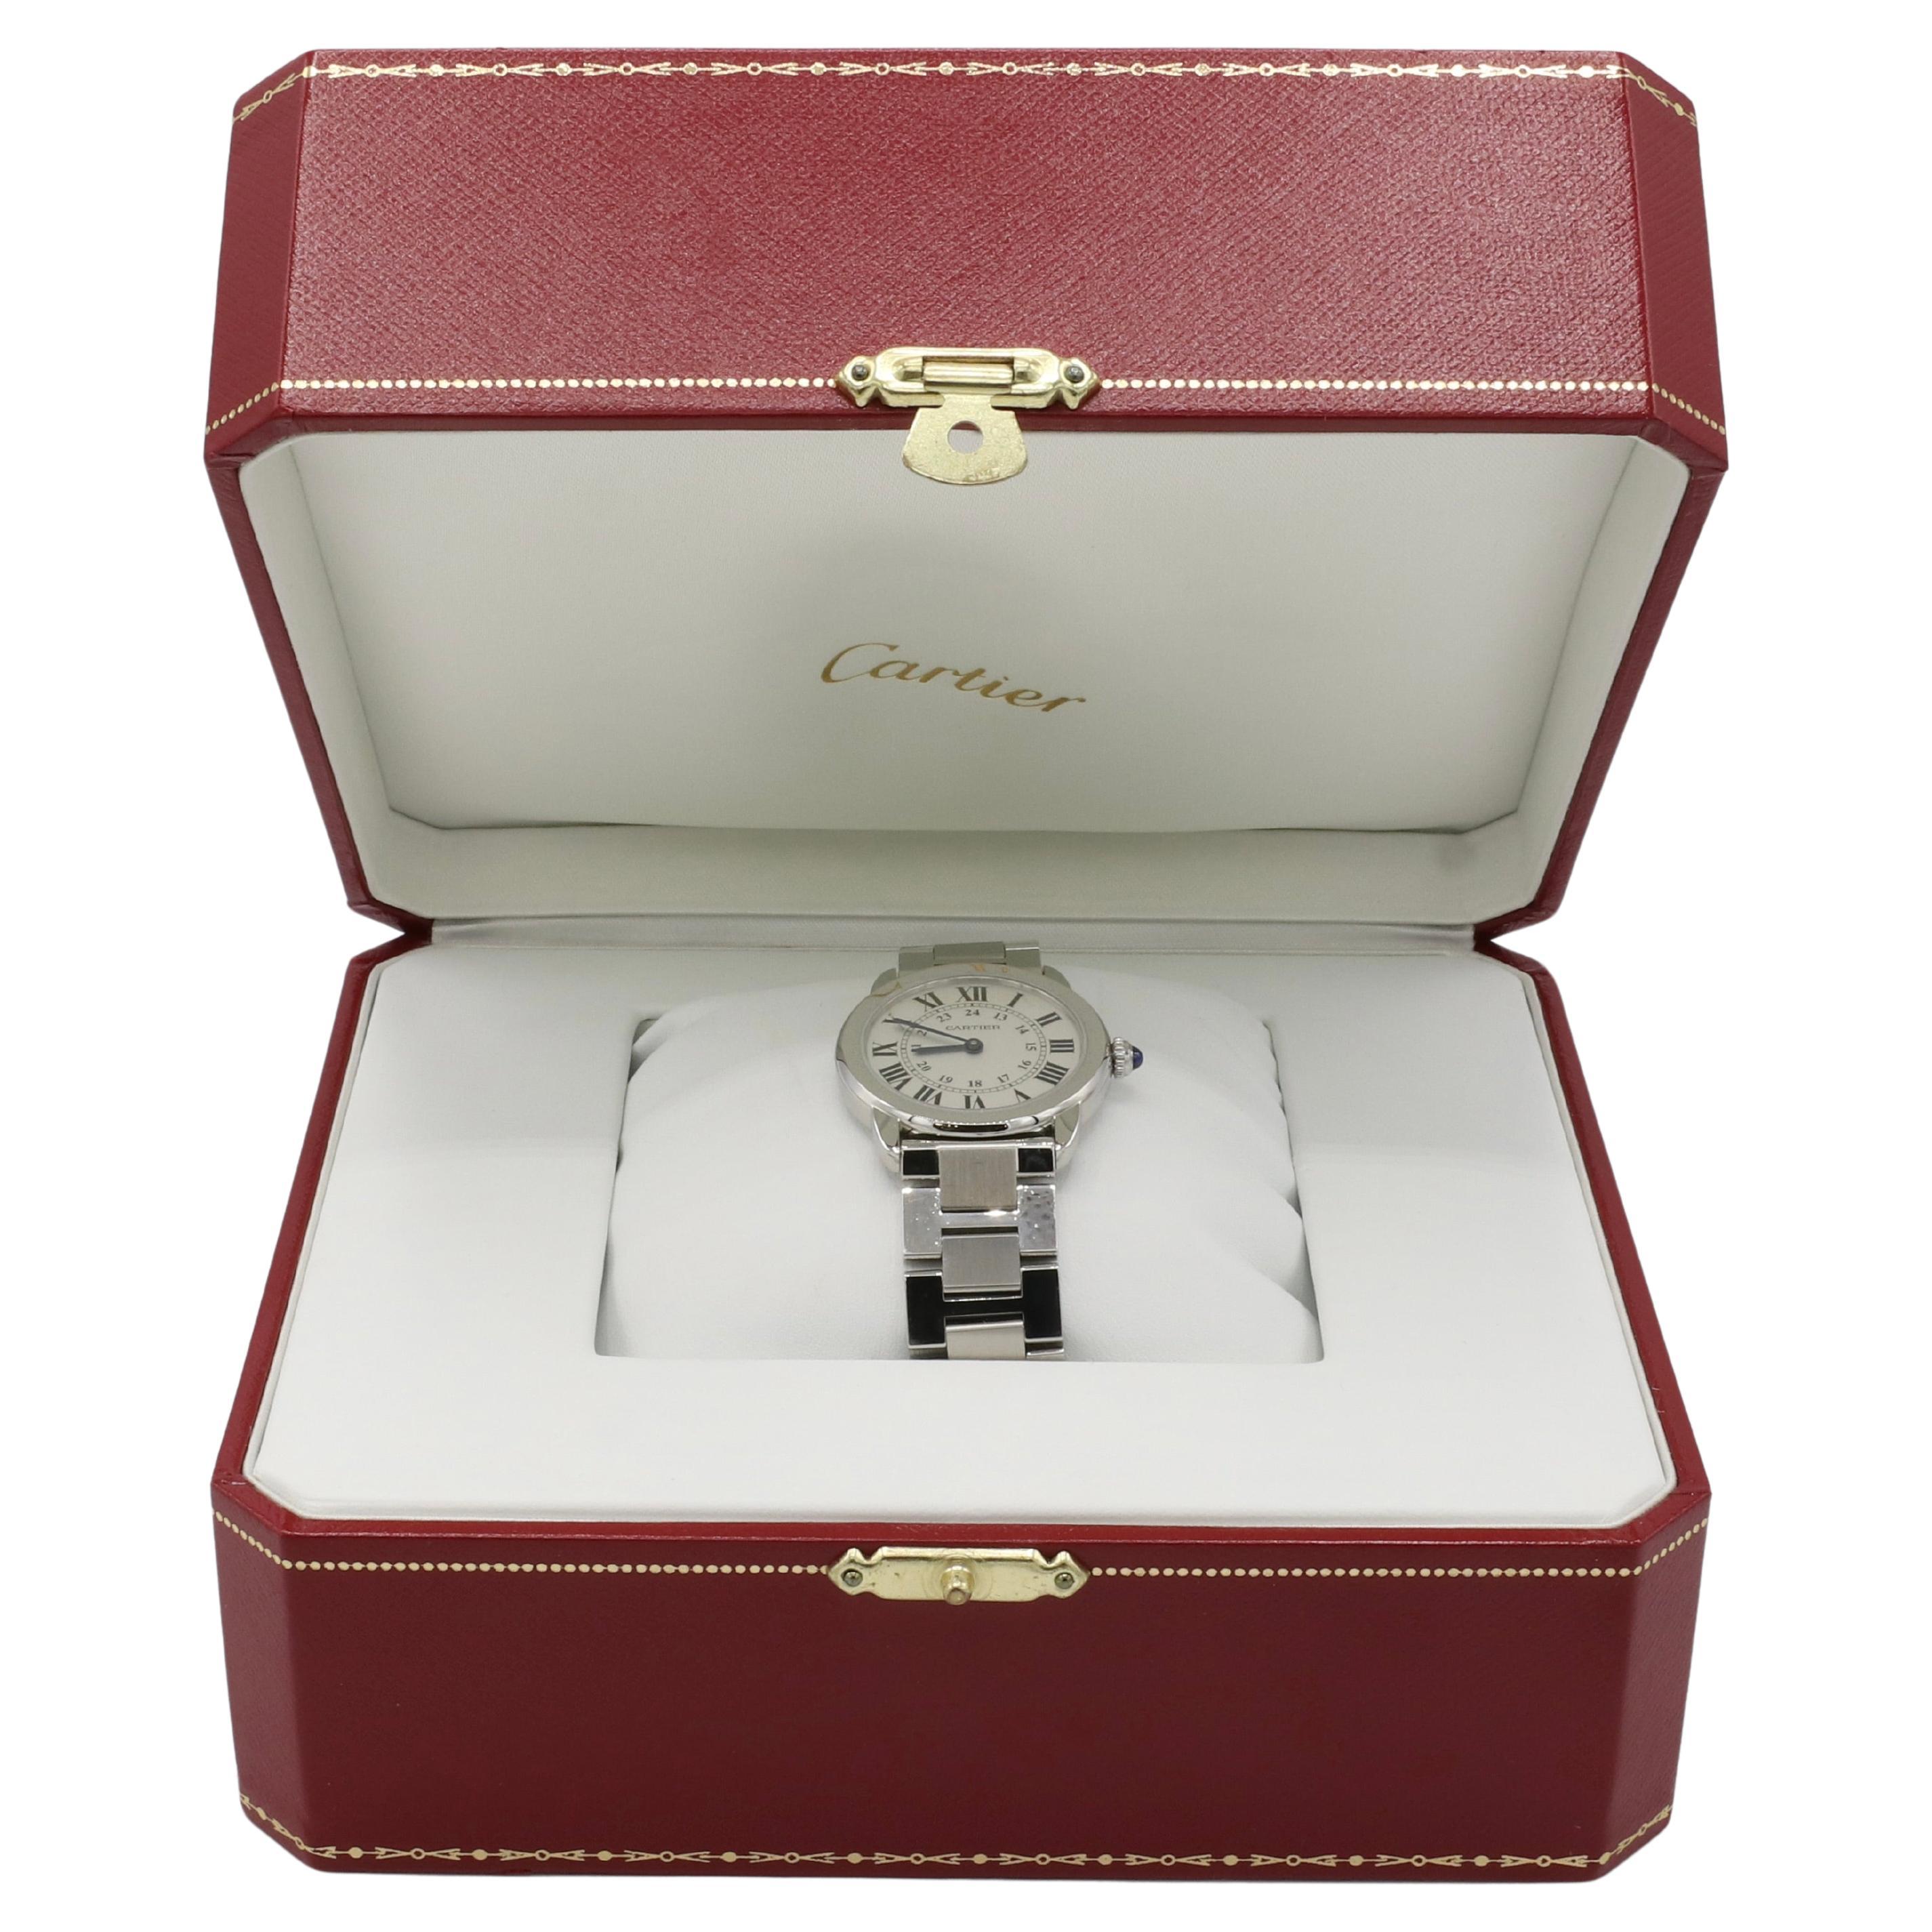 Cartier Ronde Solo 29MM Stainless Steel Women's Watch W6701004 3601 
Metal: Stainless steel
Case size: 29mm
Dial: Silver
Reference: W6701004 3601 
Movement: Quartz
Wrist size: 7 inches when clasped 
Crystal: Sapphire
Note: Box included
